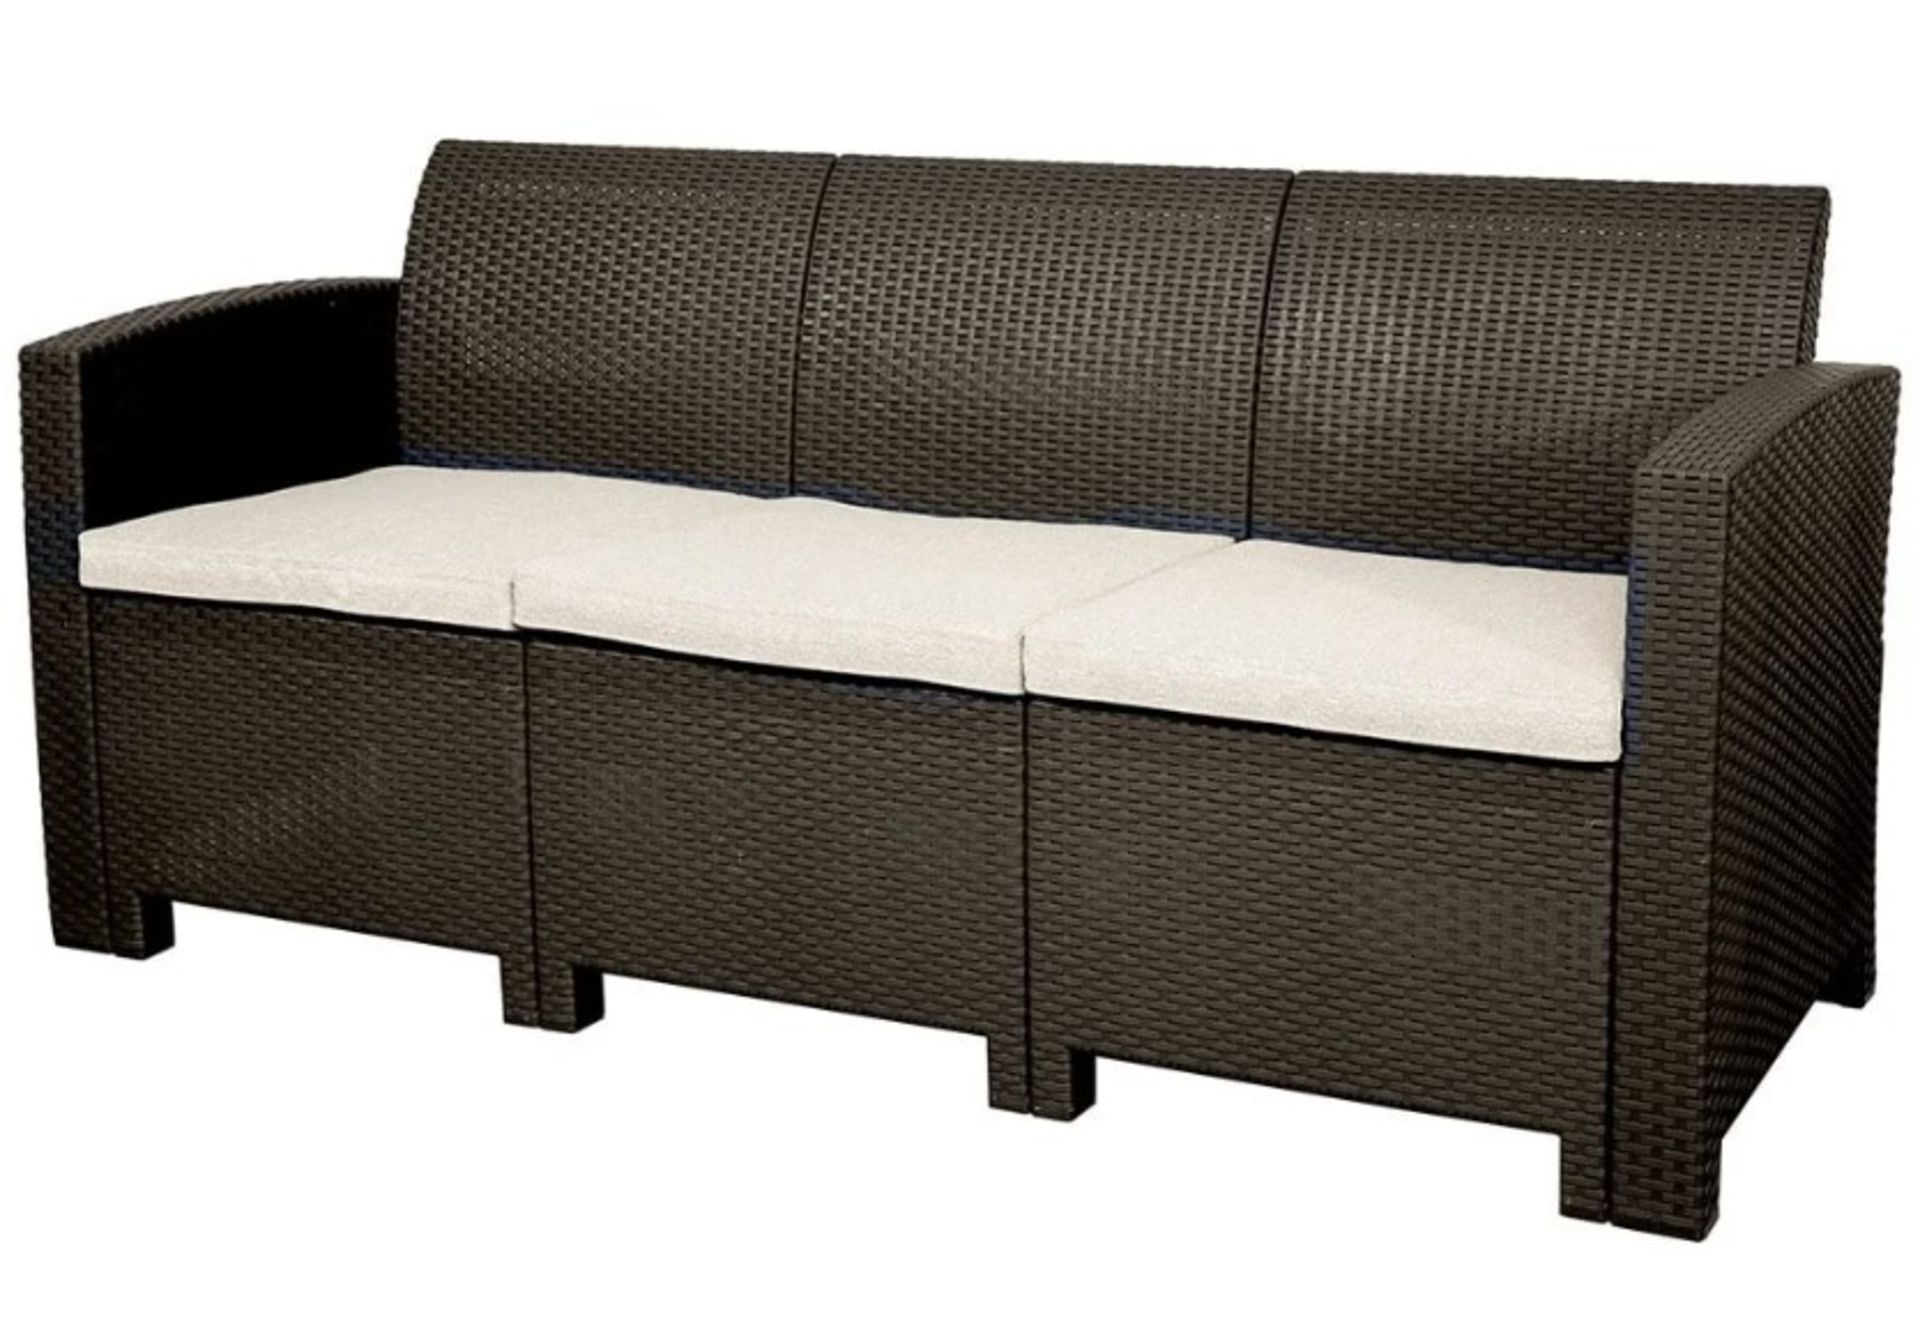 New Boxed Marbella 3-Seater Rattan-Effect Sofa in Brown. RRP £399.99. With a unique modern finish, - Image 4 of 4